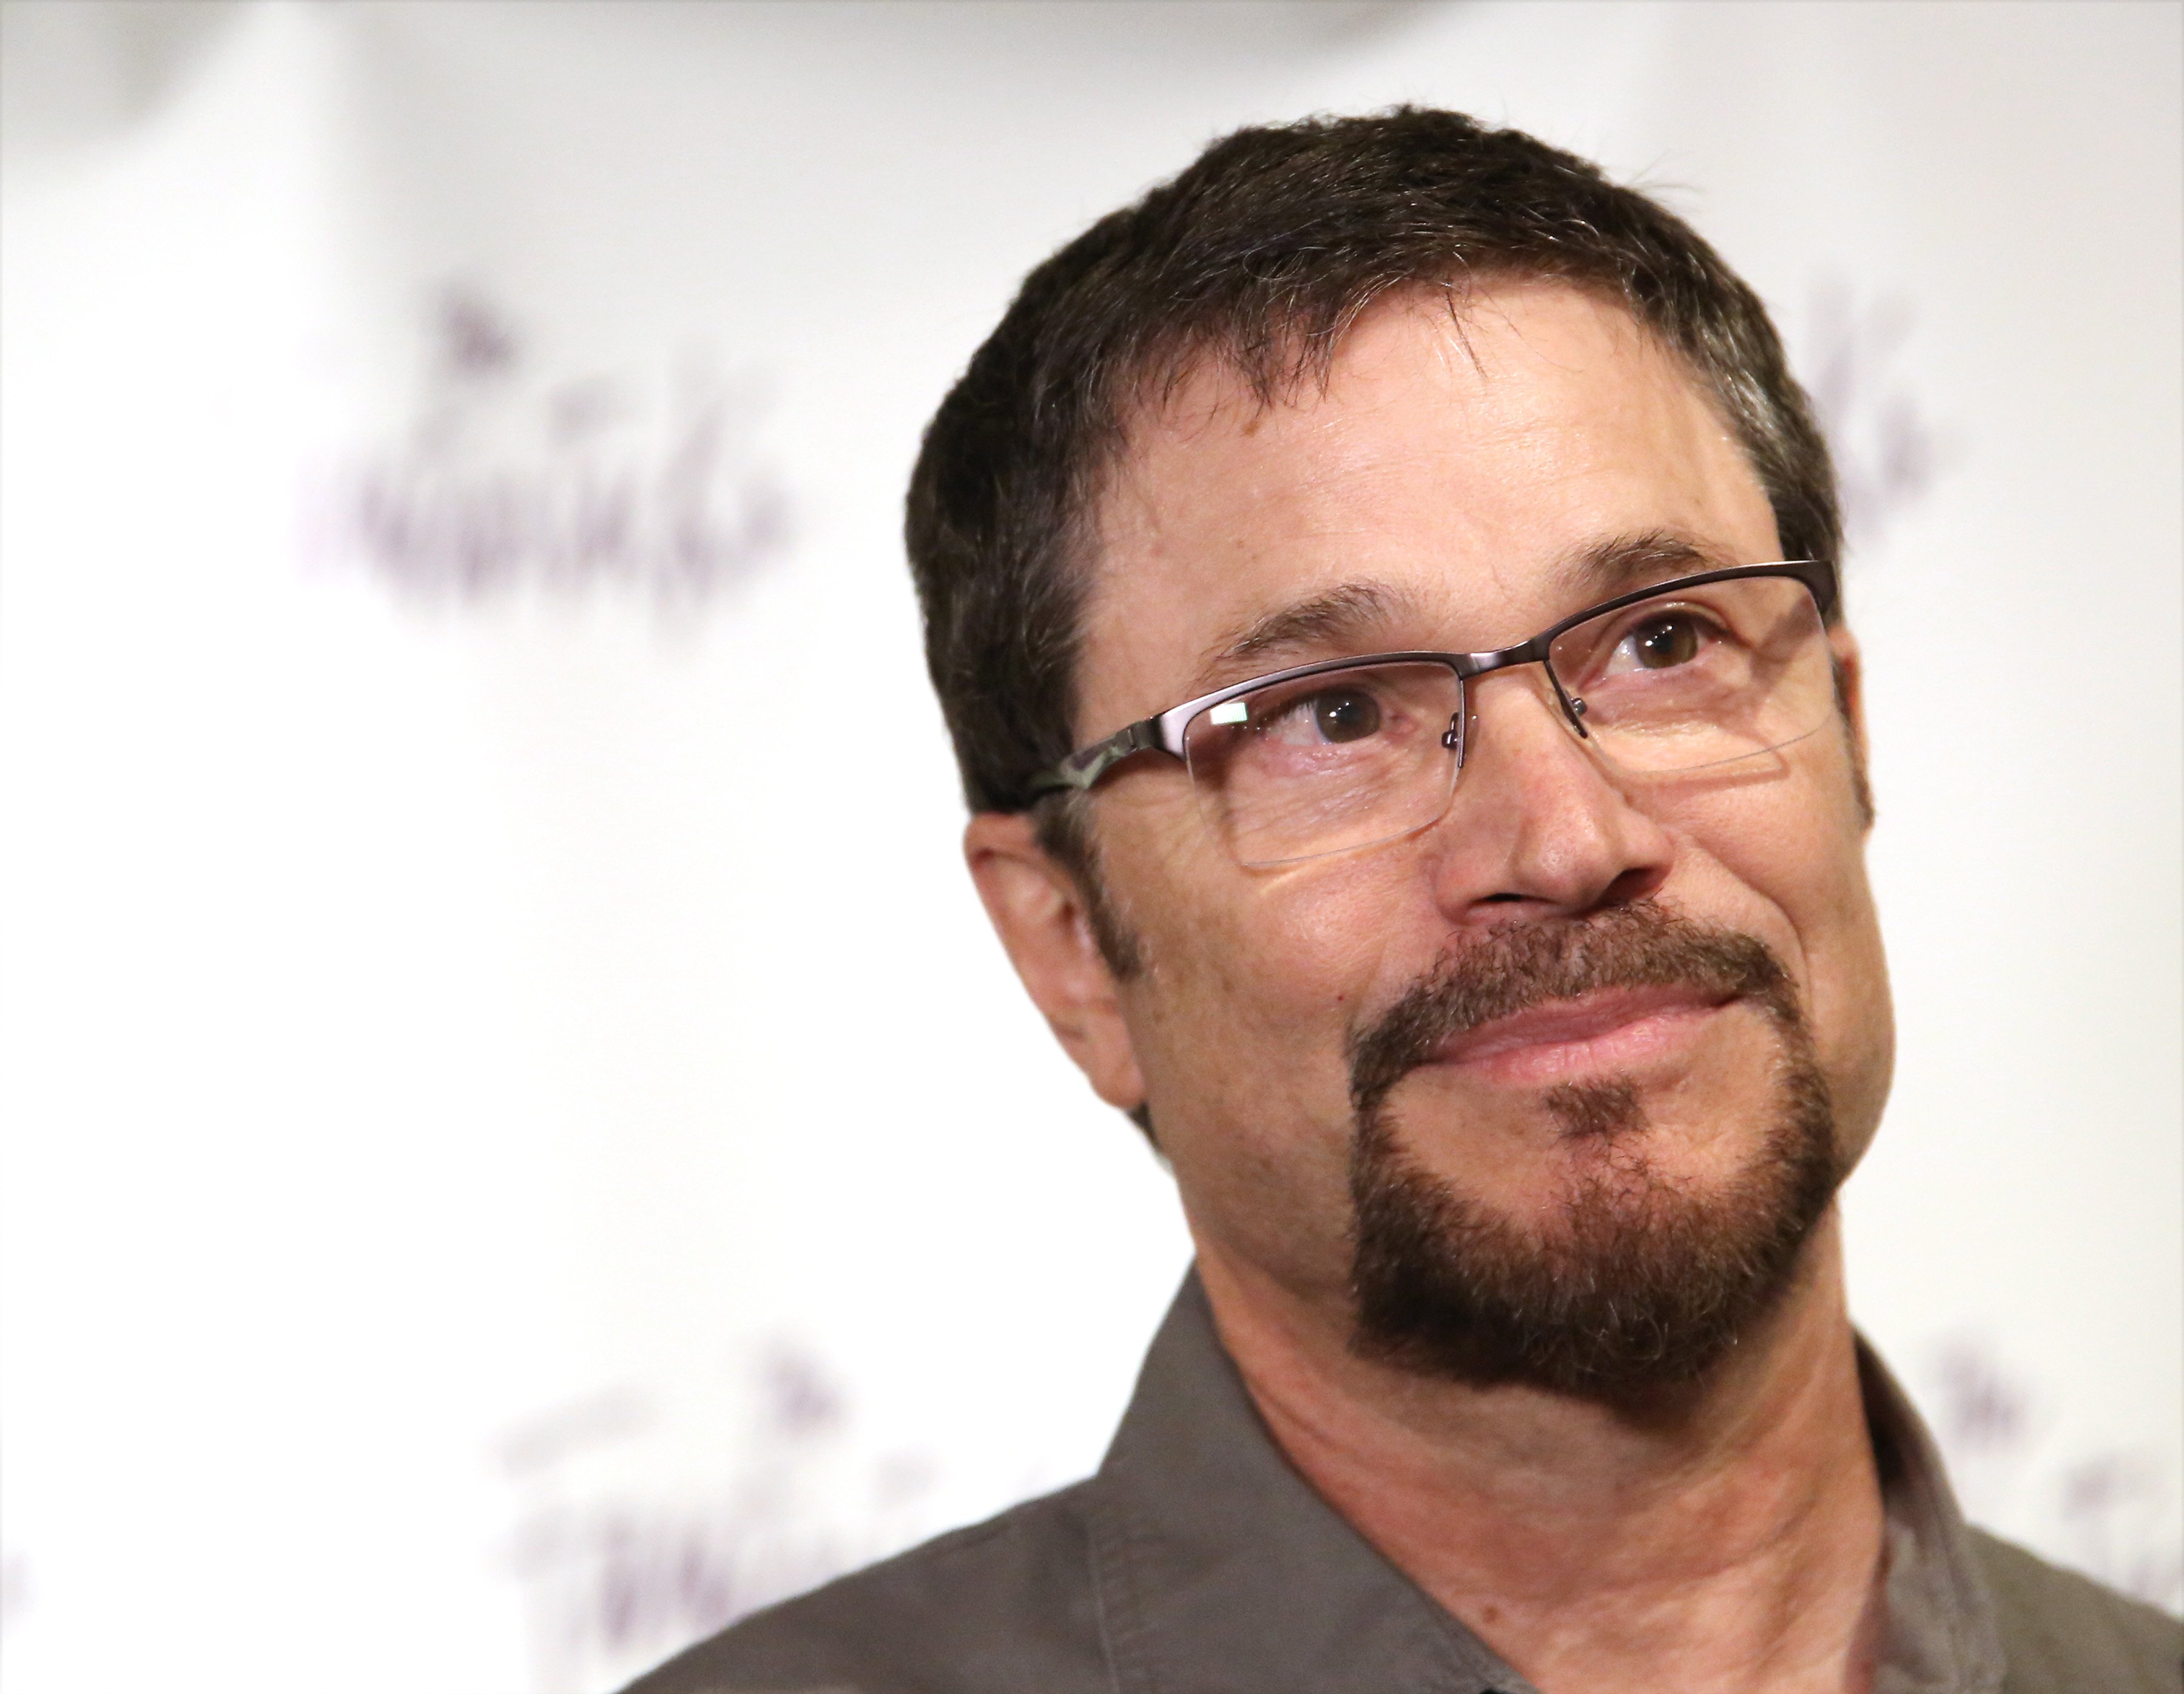 'Days of Our Lives' star Peter Reckell in a grey shirt and glasses; posing on the red carpet.